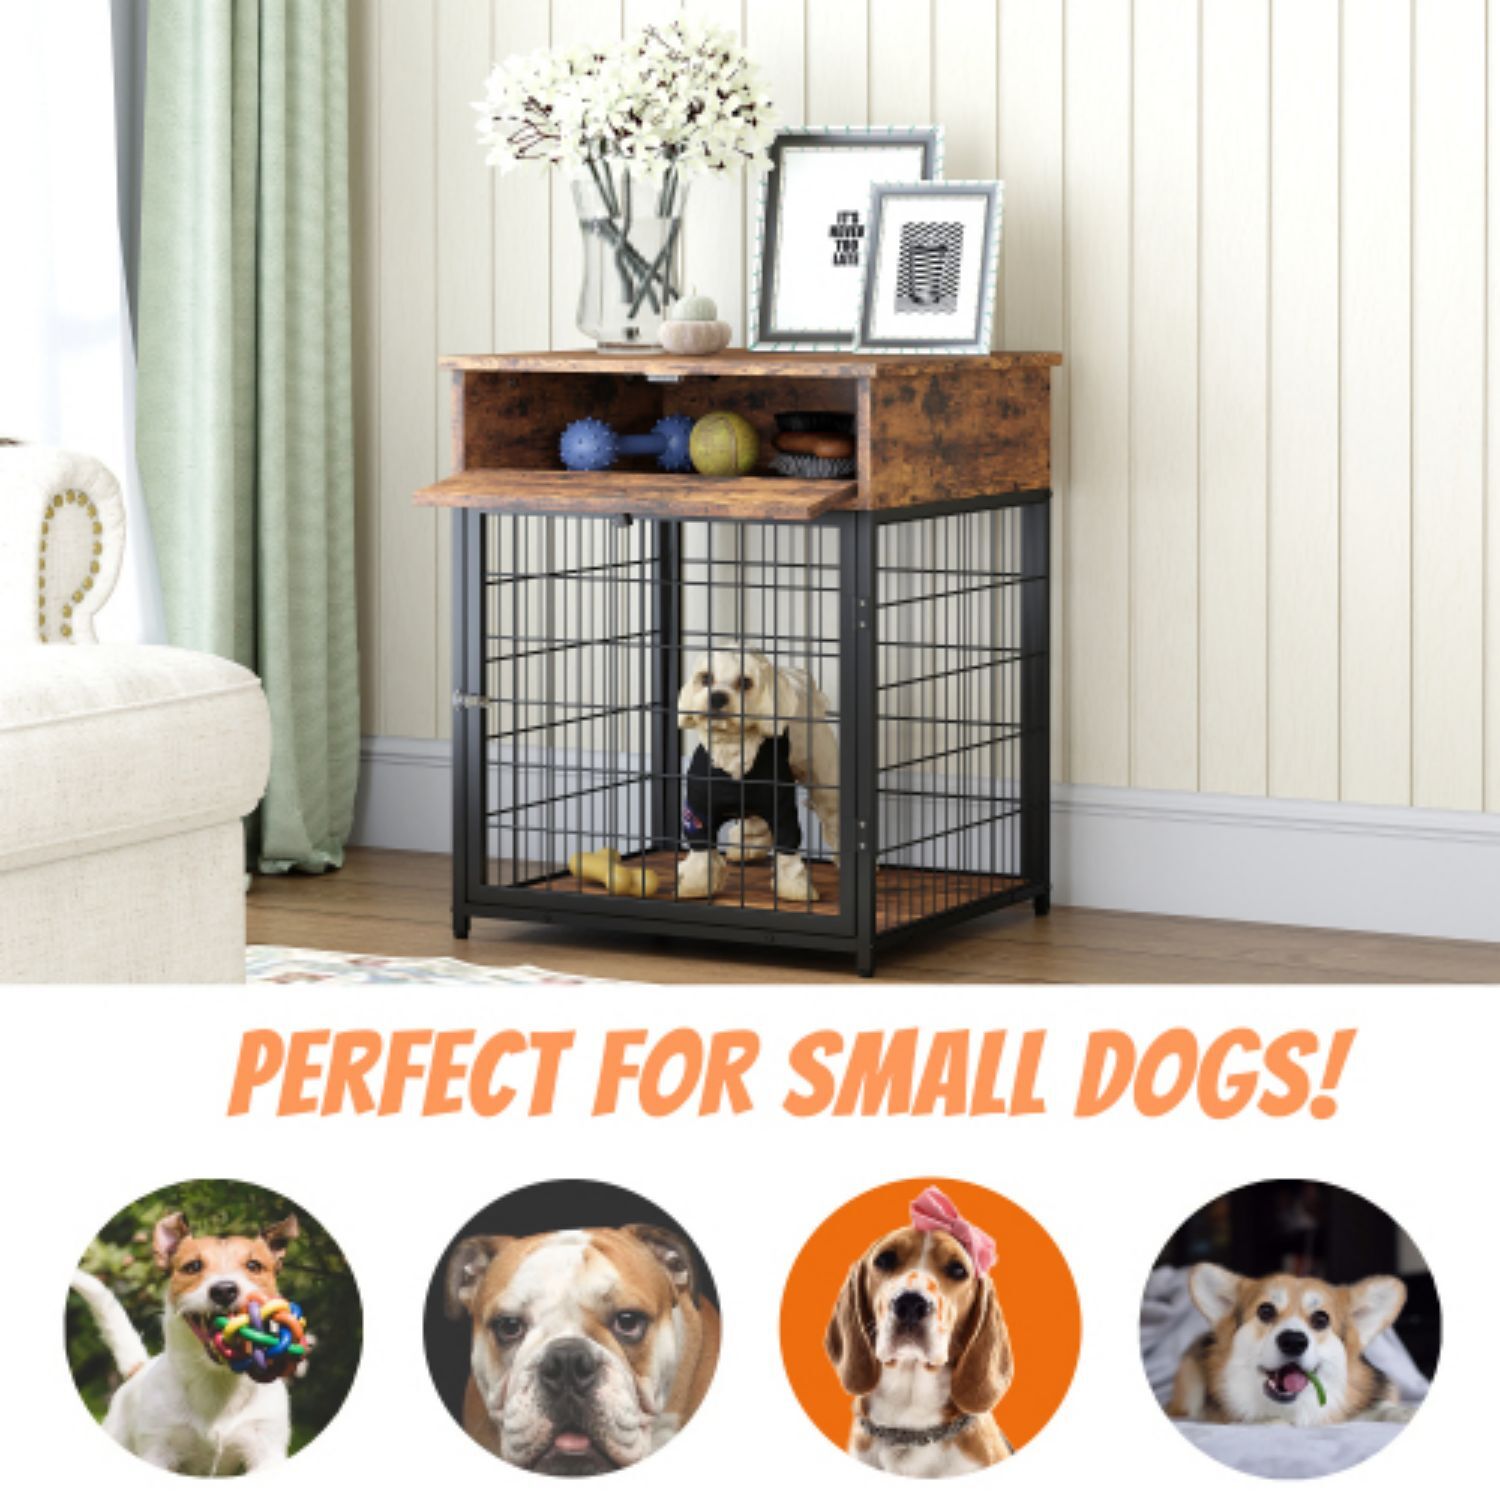 Cmgb Dog Crates for small dogs Wooden Dog Rustic Brown